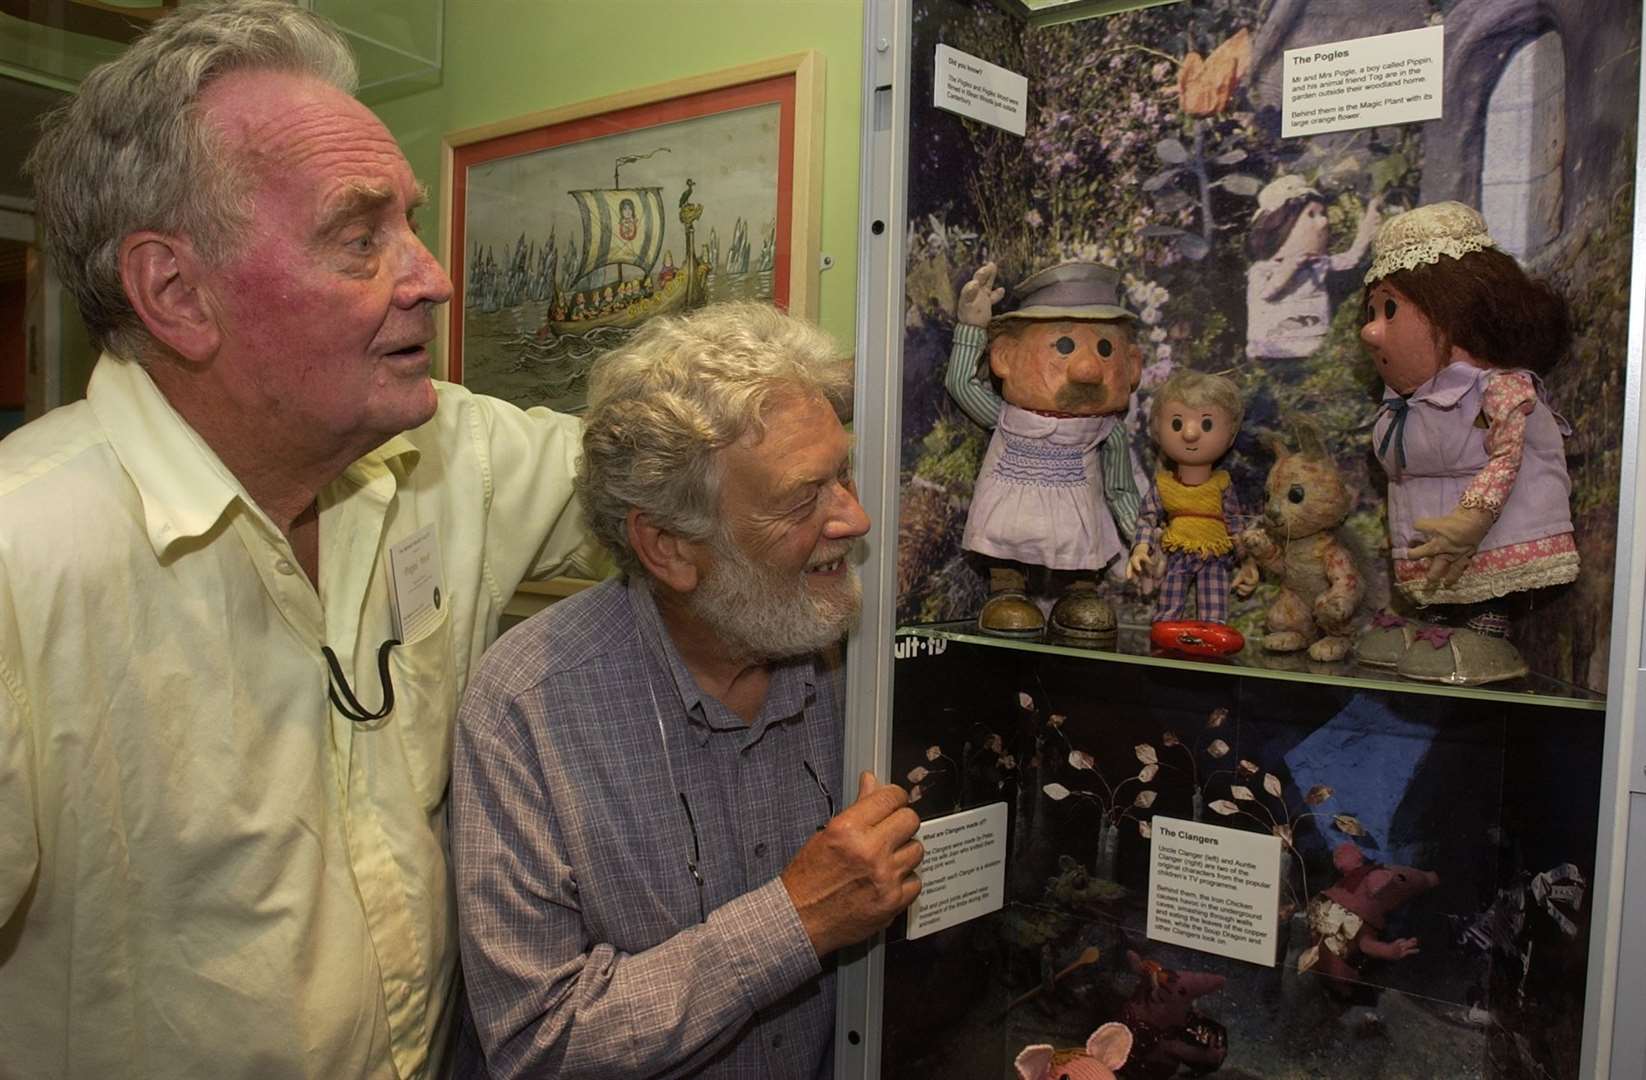 Oliver Postgate and Peter Firmin - the duo who provided the backbone for much of the BBC's children's output back in the day